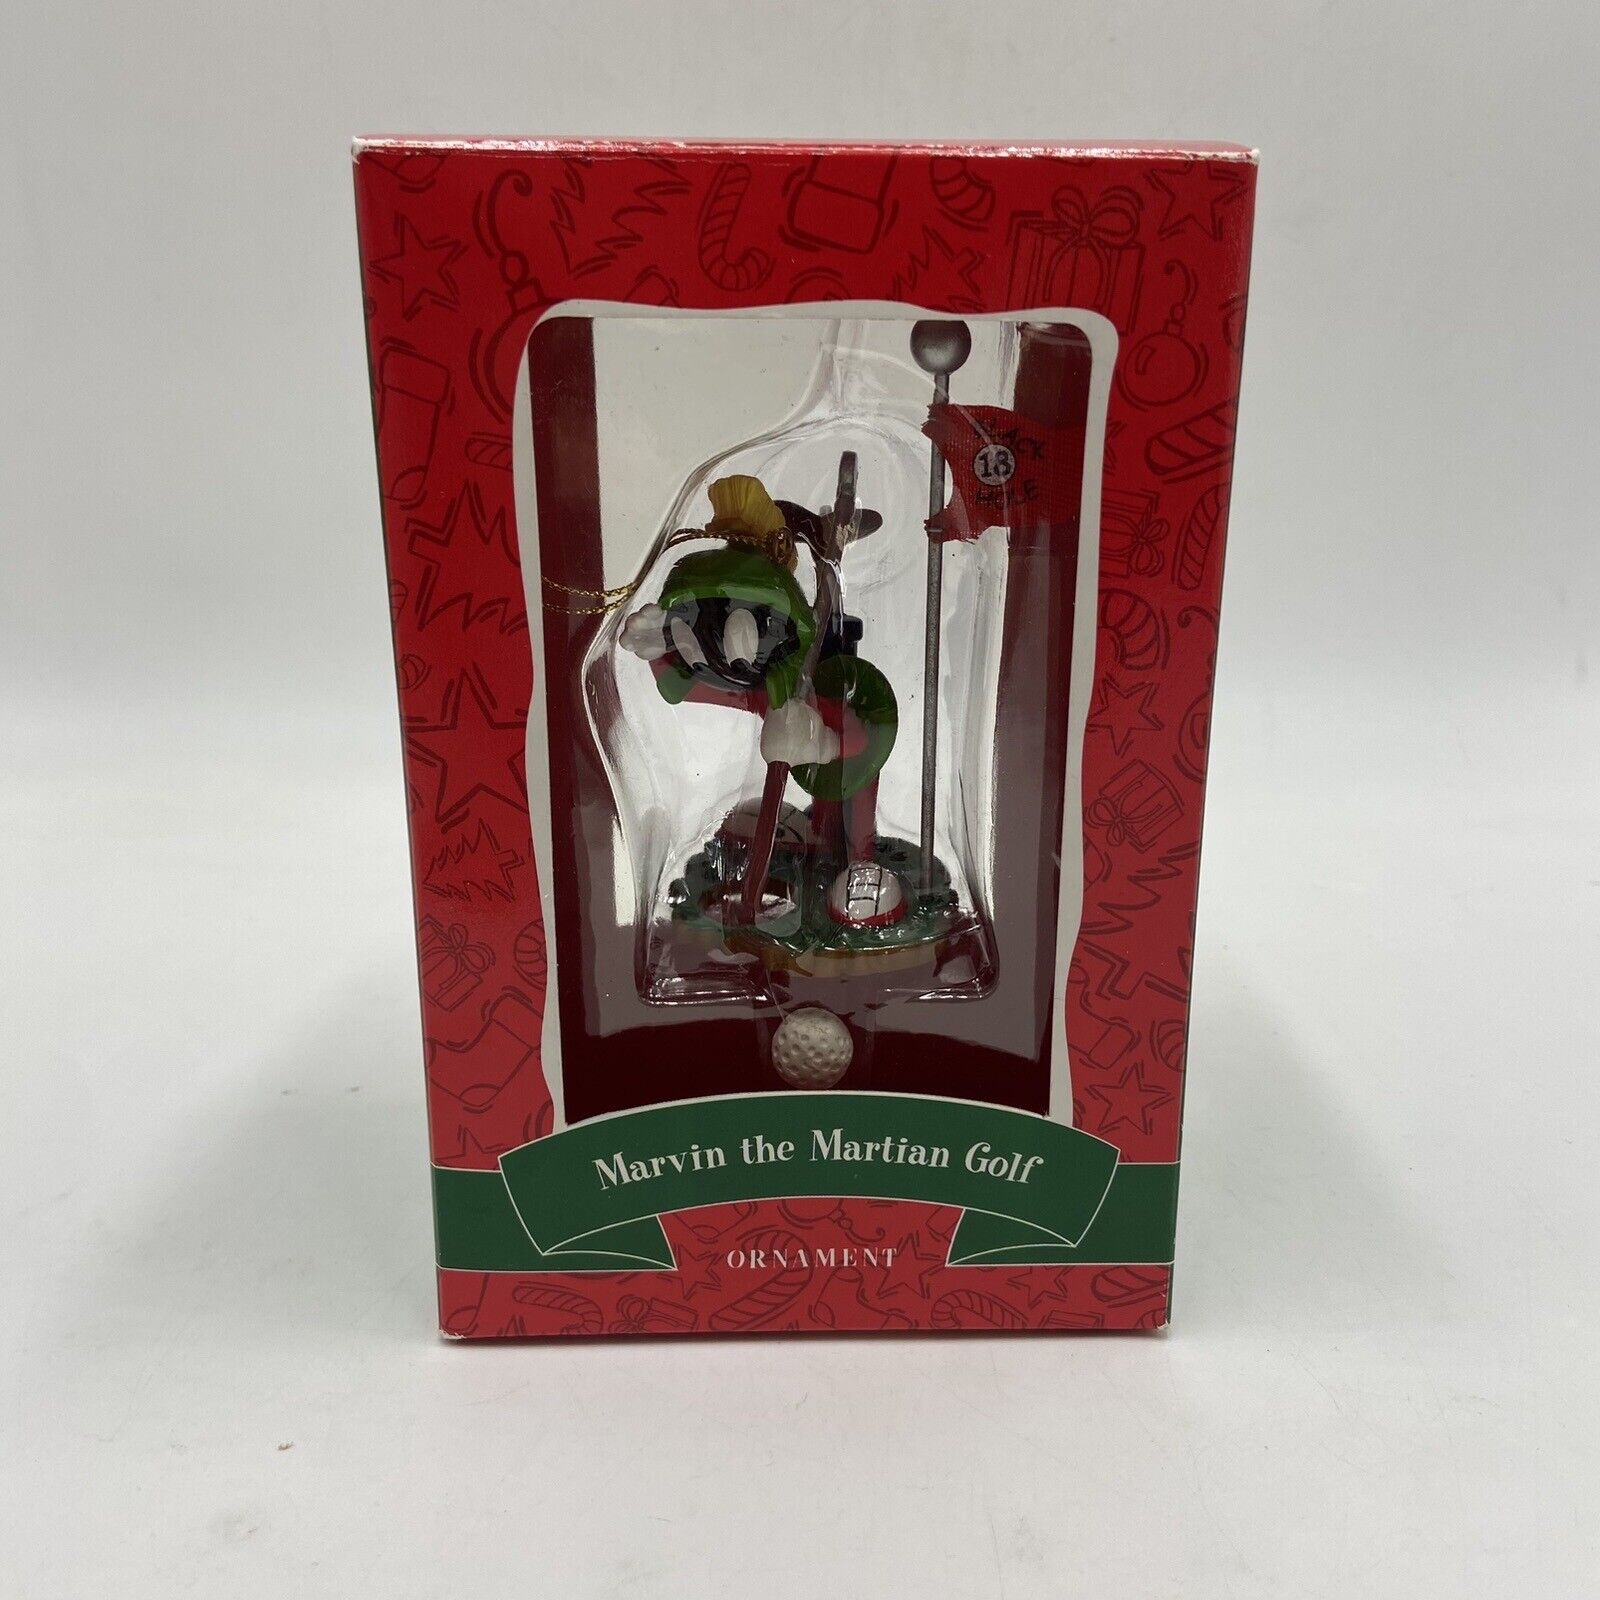 2000 Marvin the Martian playing golf Ornament Looney Tunes Warner Brothers